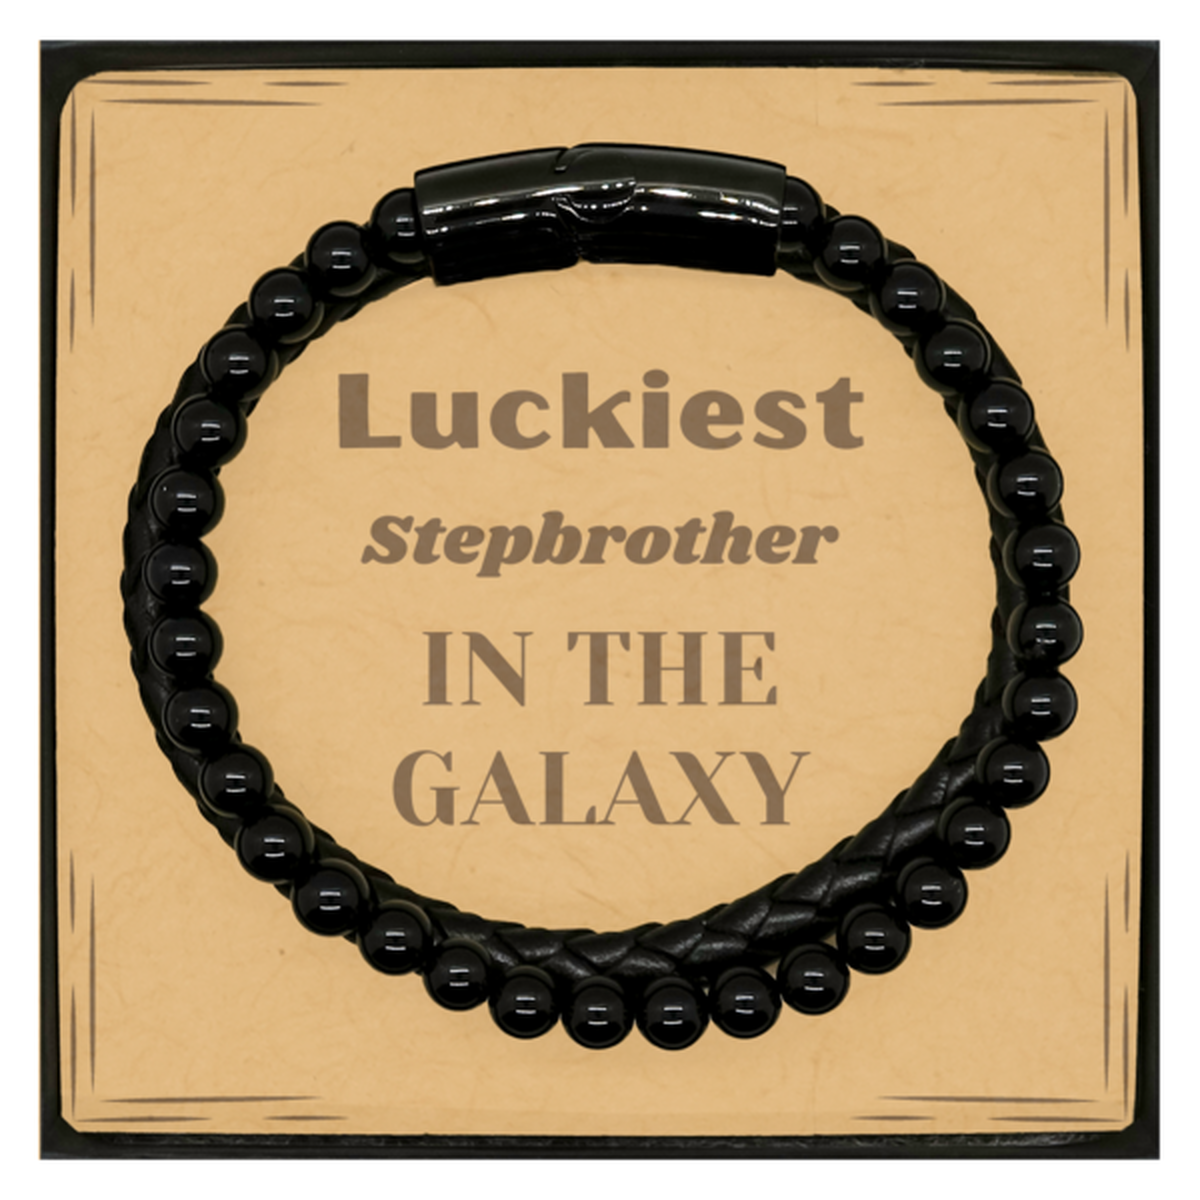 Luckiest Stepbrother in the Galaxy, To My Stepbrother Message Card Gifts, Christmas Stepbrother Stone Leather Bracelets Gifts, X-mas Birthday Unique Gifts For Stepbrother Men Women